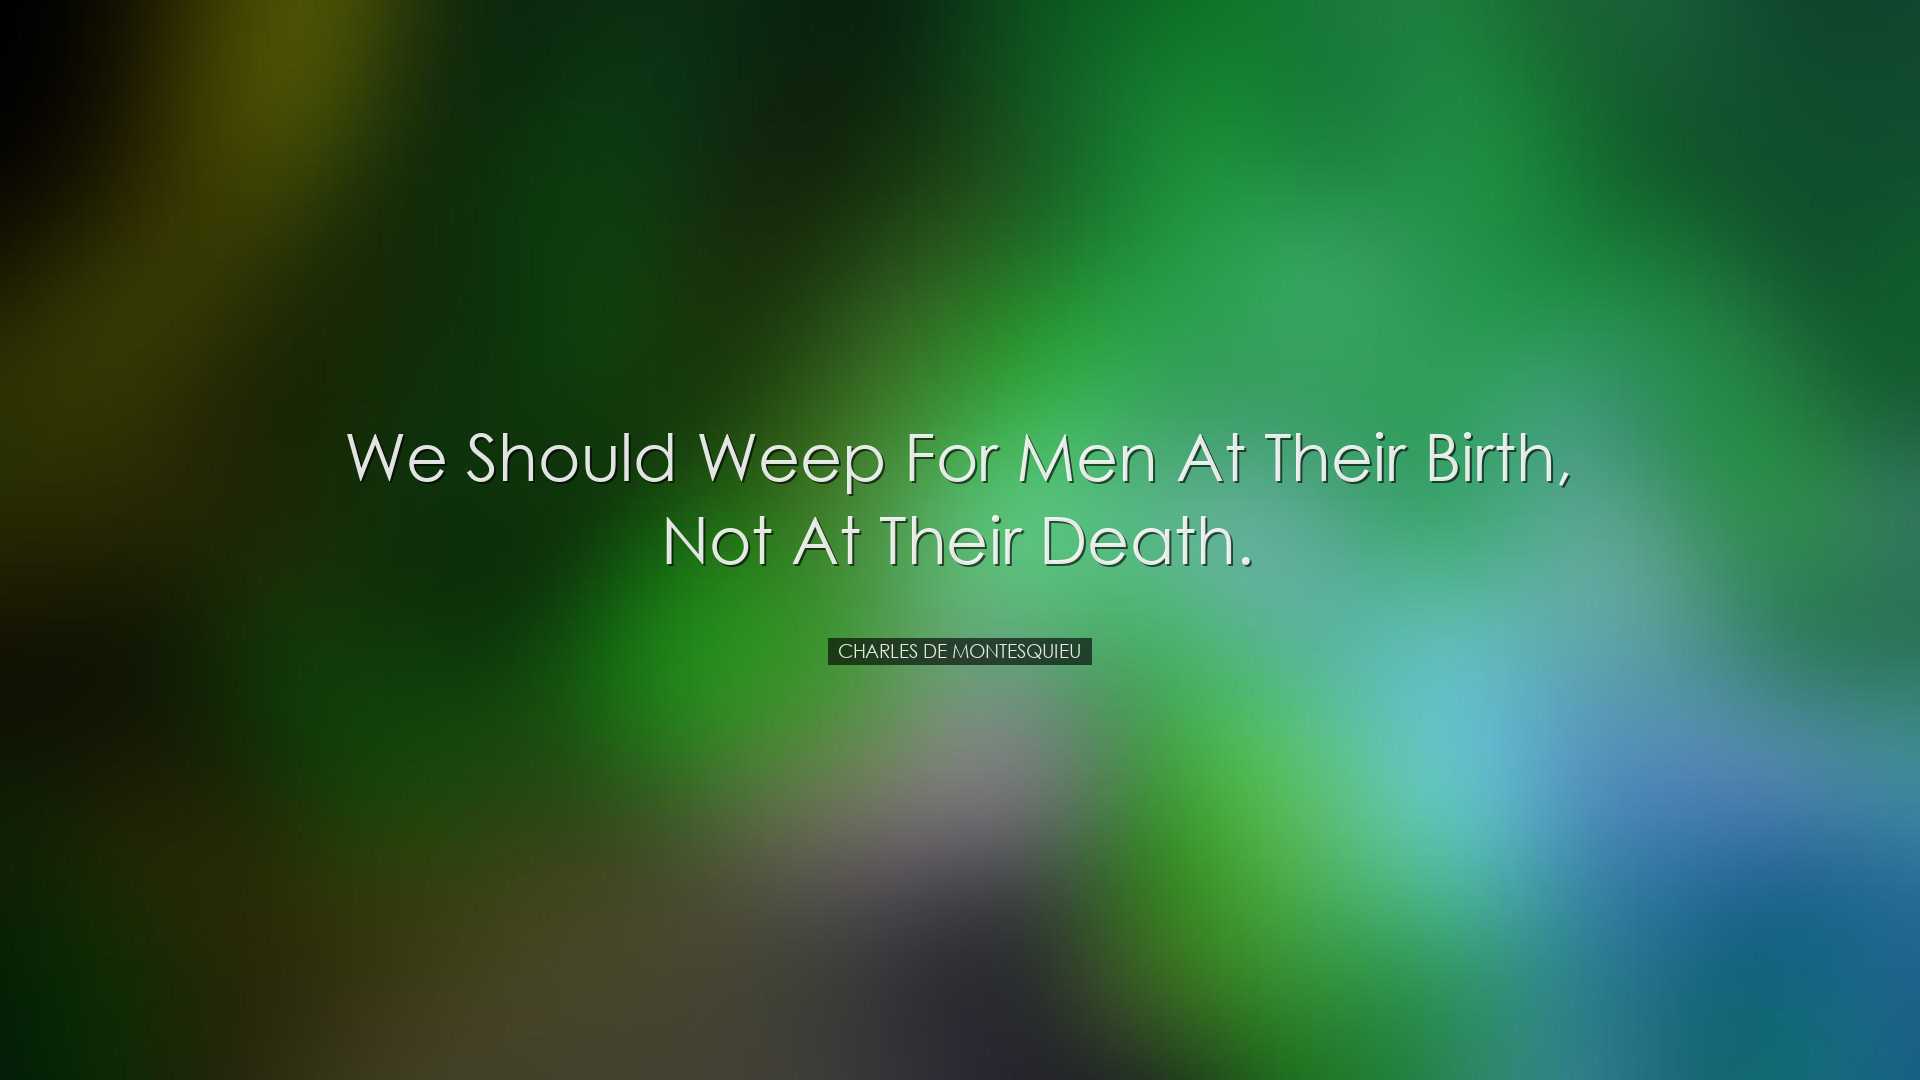 We should weep for men at their birth, not at their death. - Charl